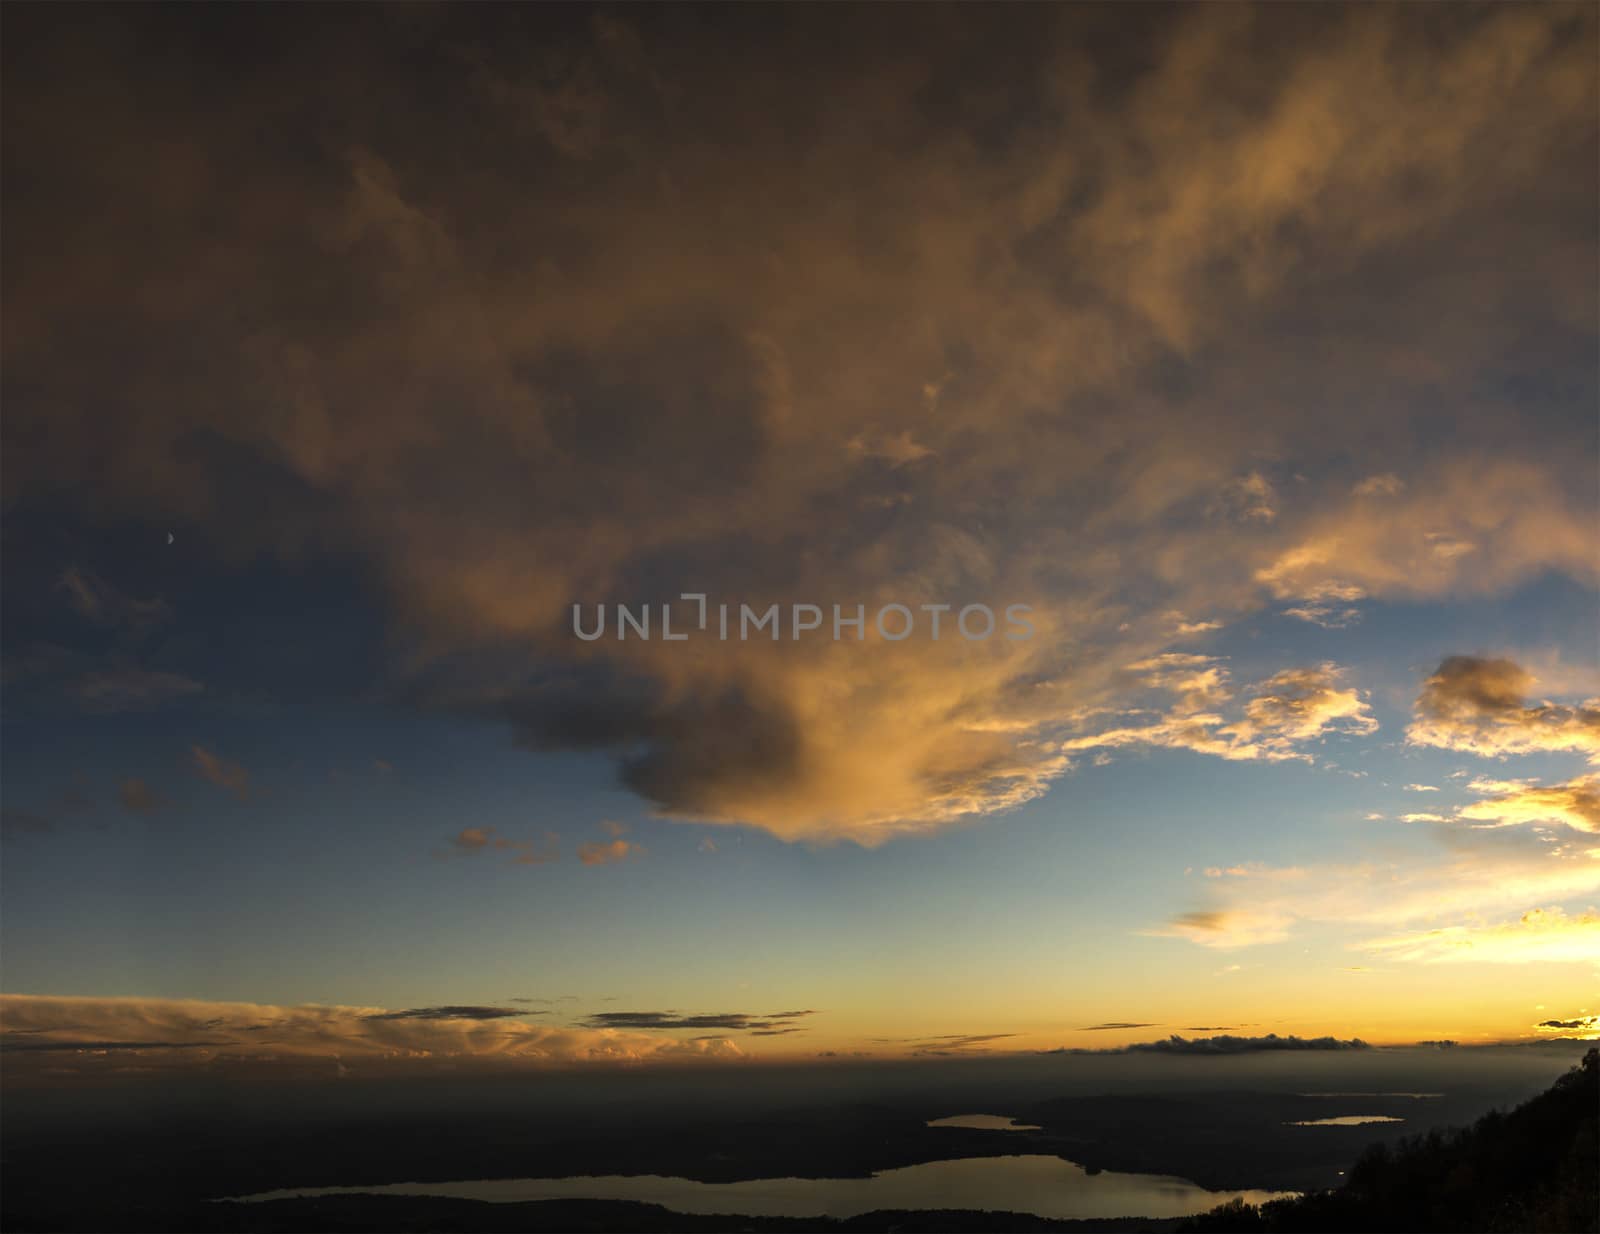 Sunset over the Varese lake, Italy by Mdc1970